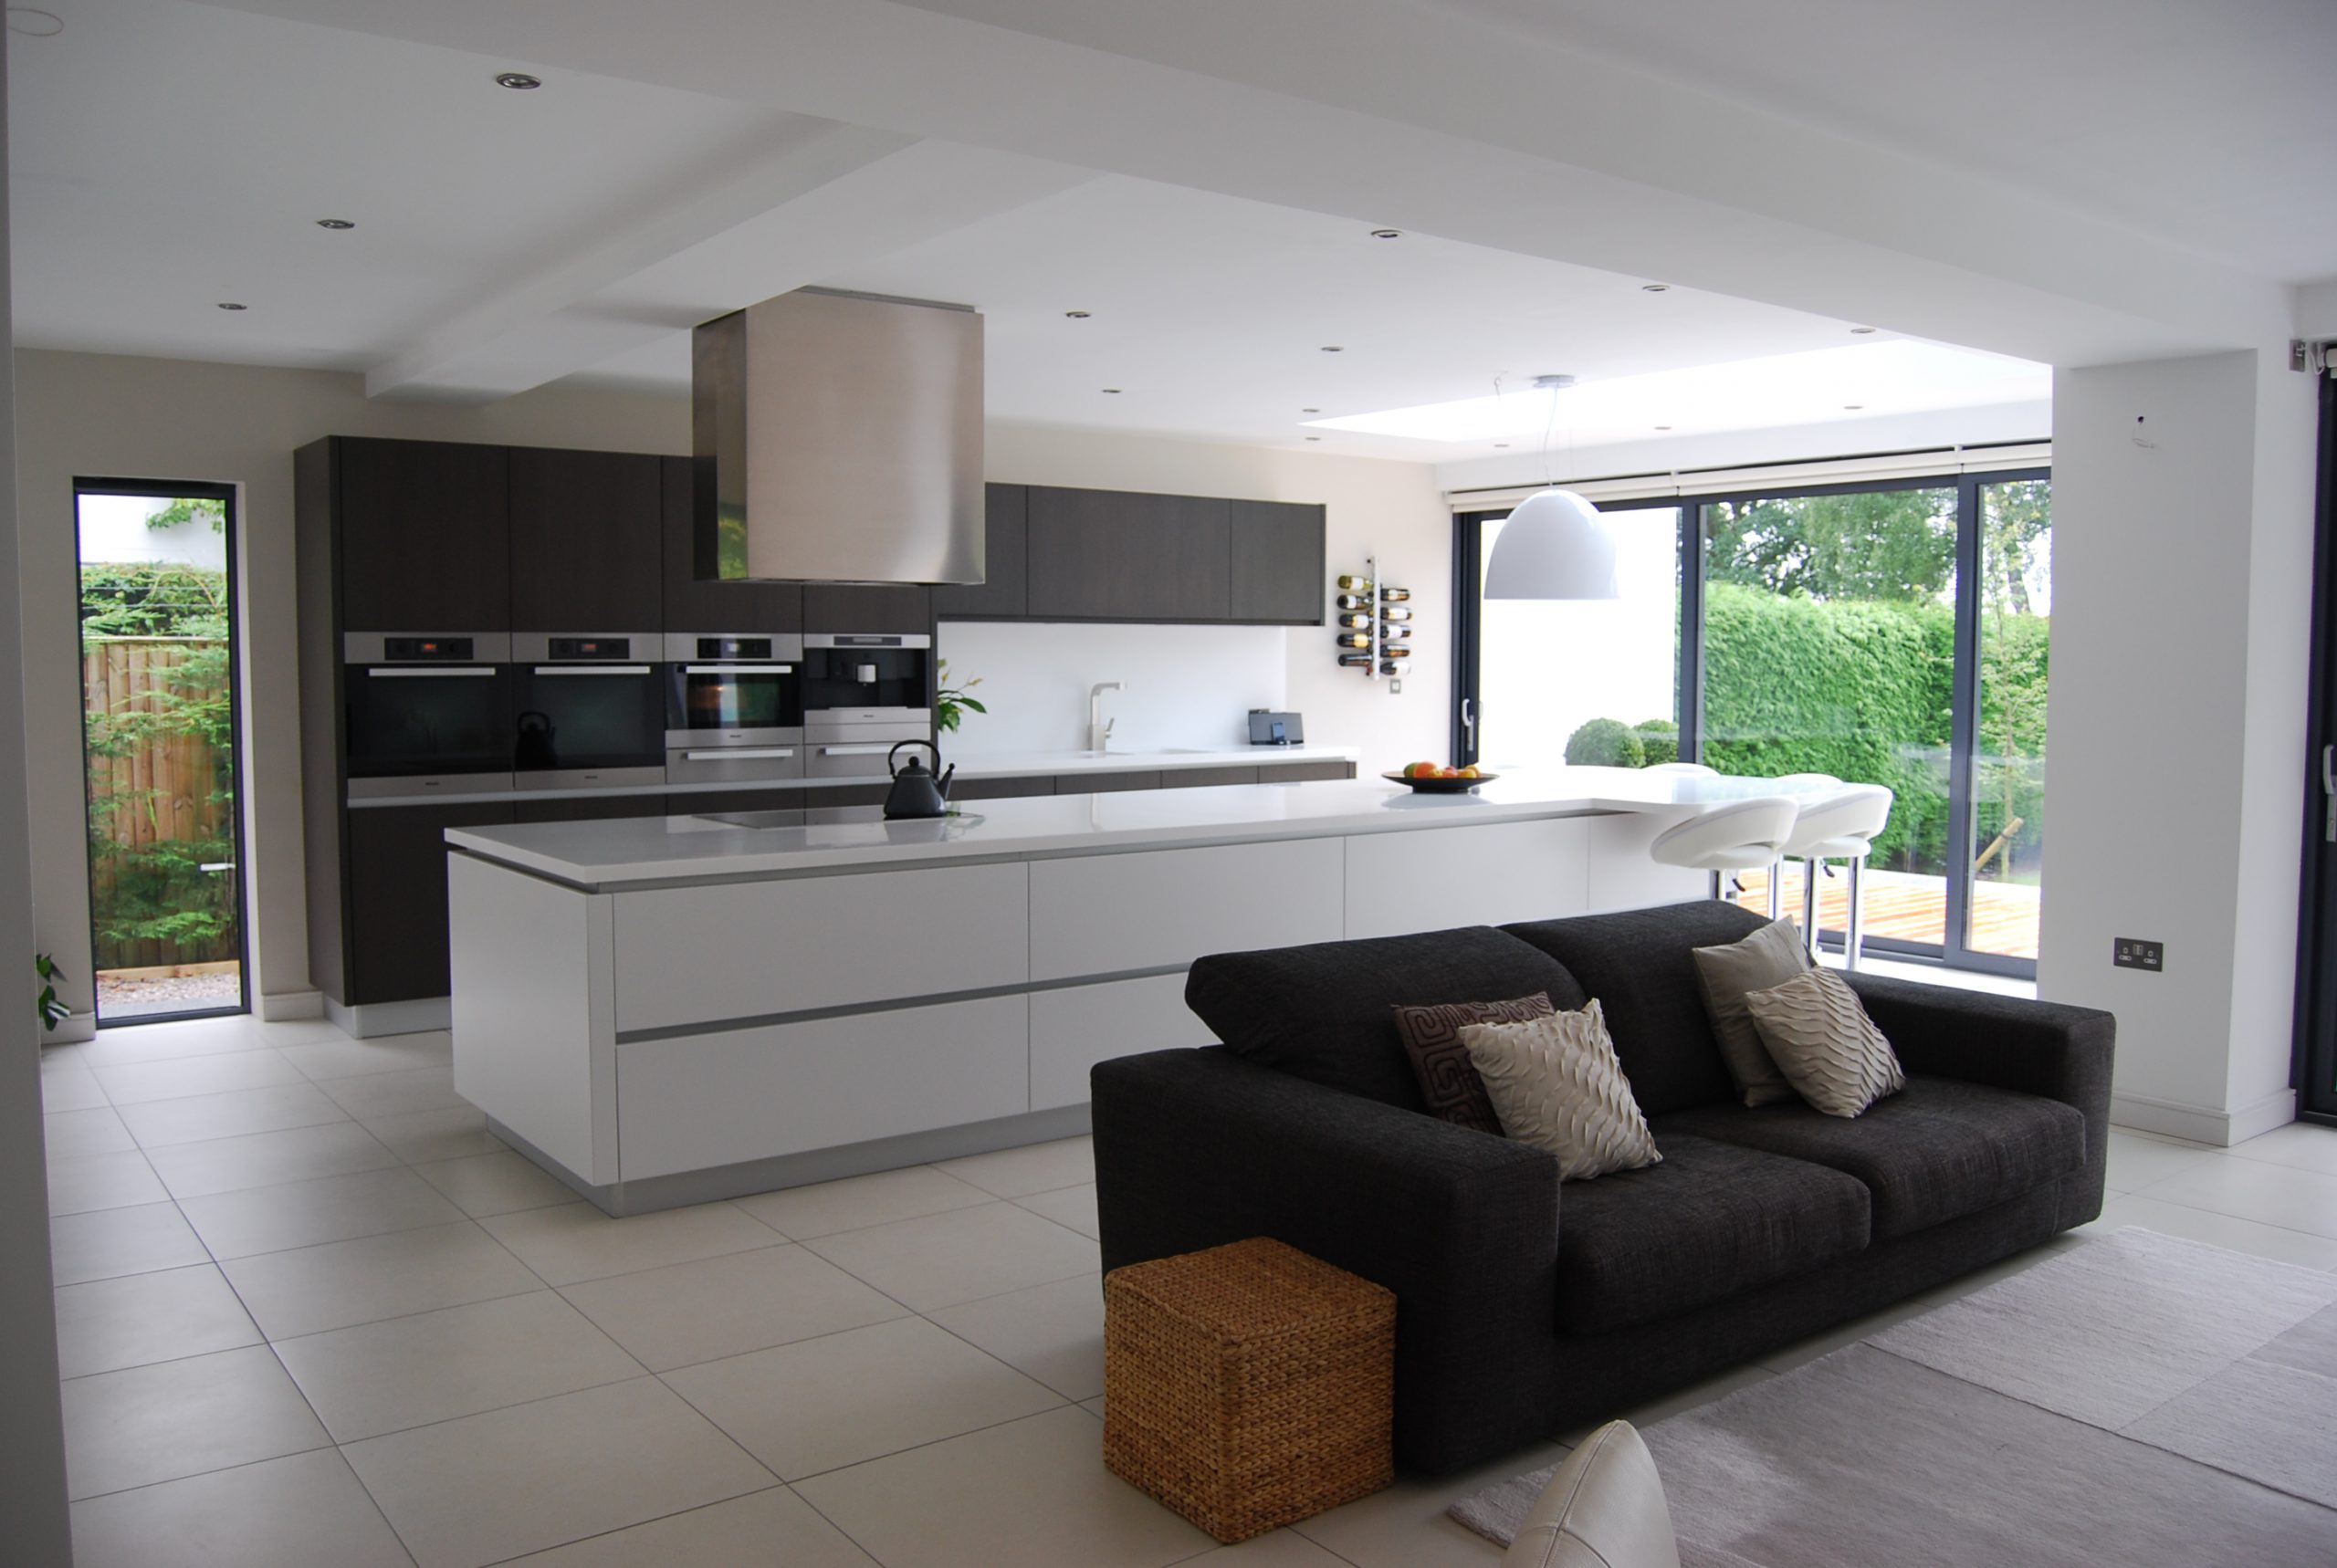 Remodelling of detached private house, Knutsford, Cheshire